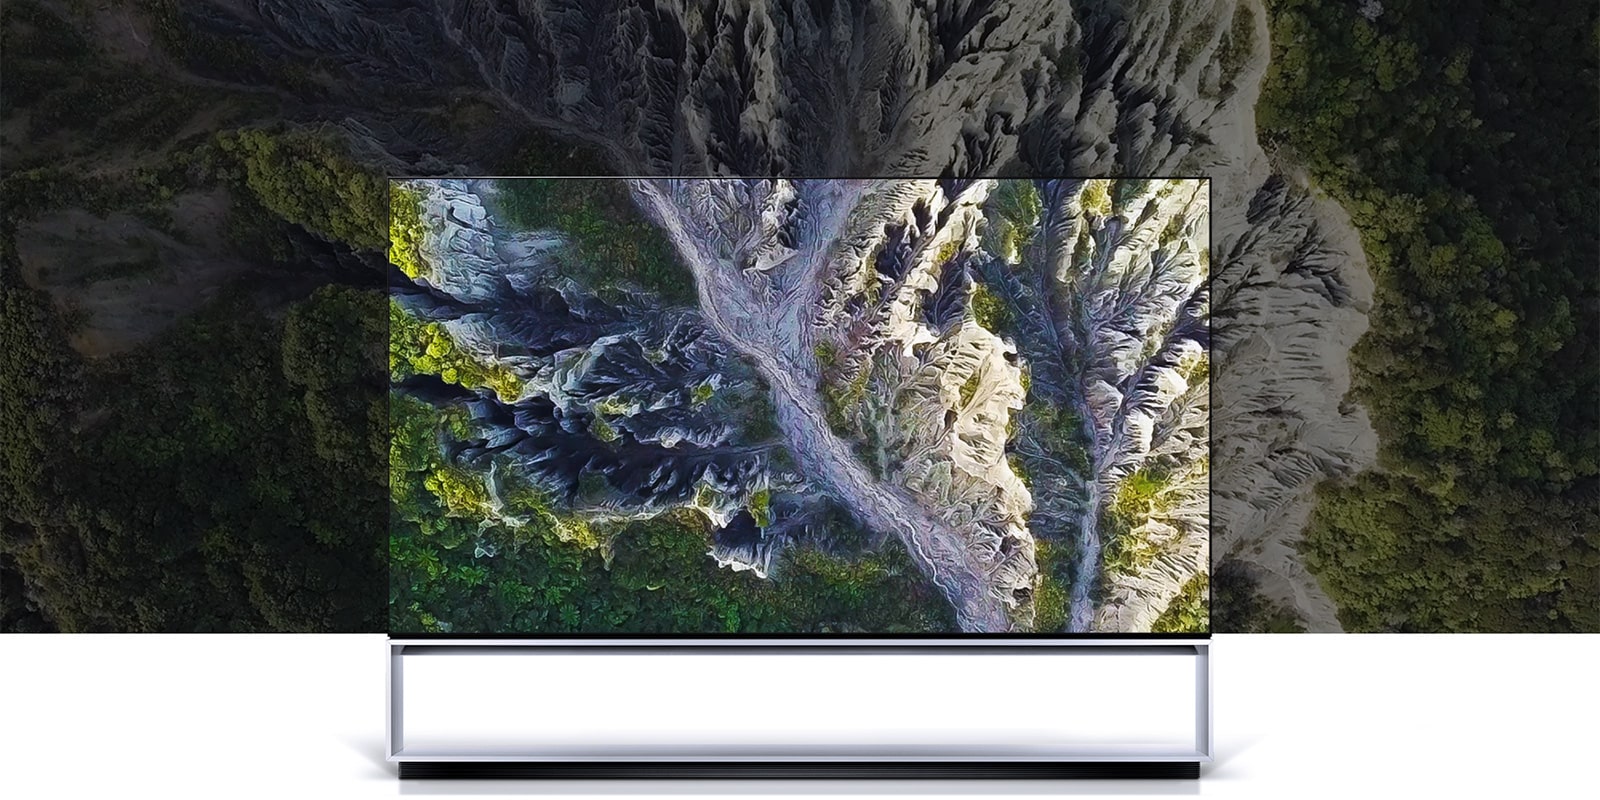 Image of LG SIGNATURE OLED TV Z9 with the screen filled with a gorge